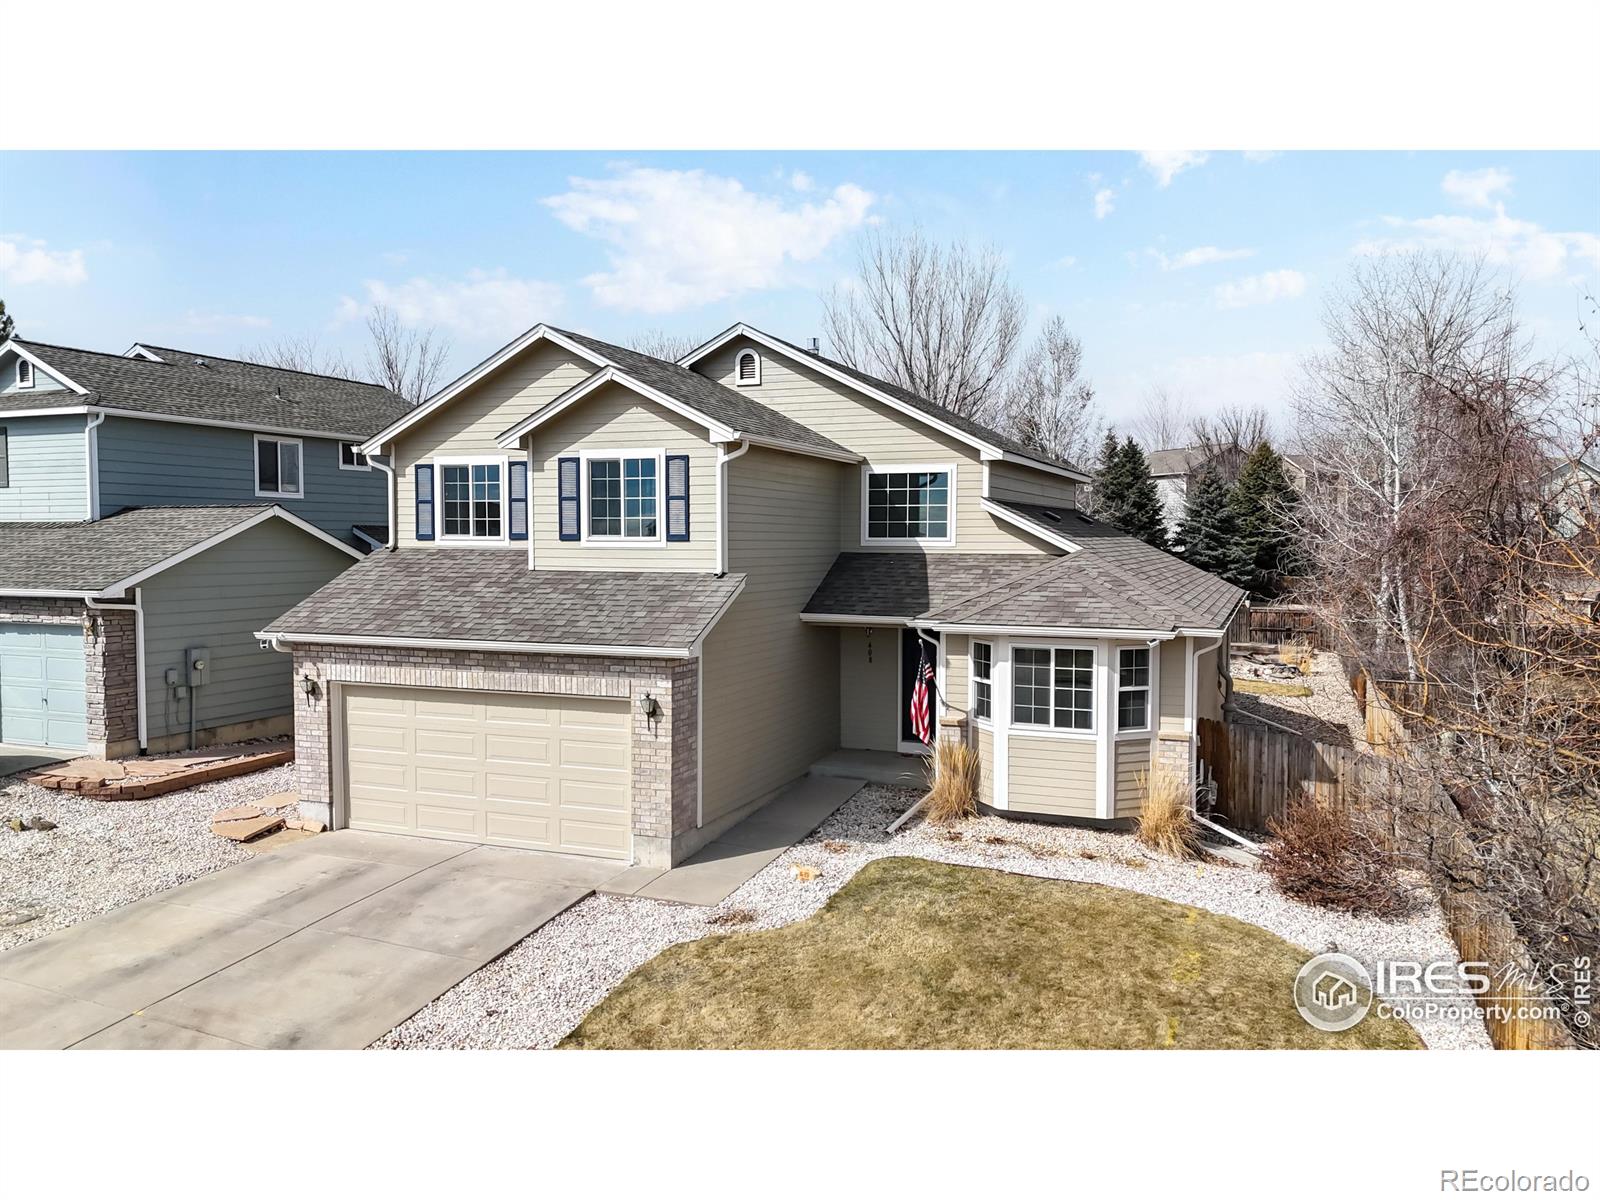 408  Triangle Drive, fort collins MLS: 4567891004582 Beds: 3 Baths: 3 Price: $575,000